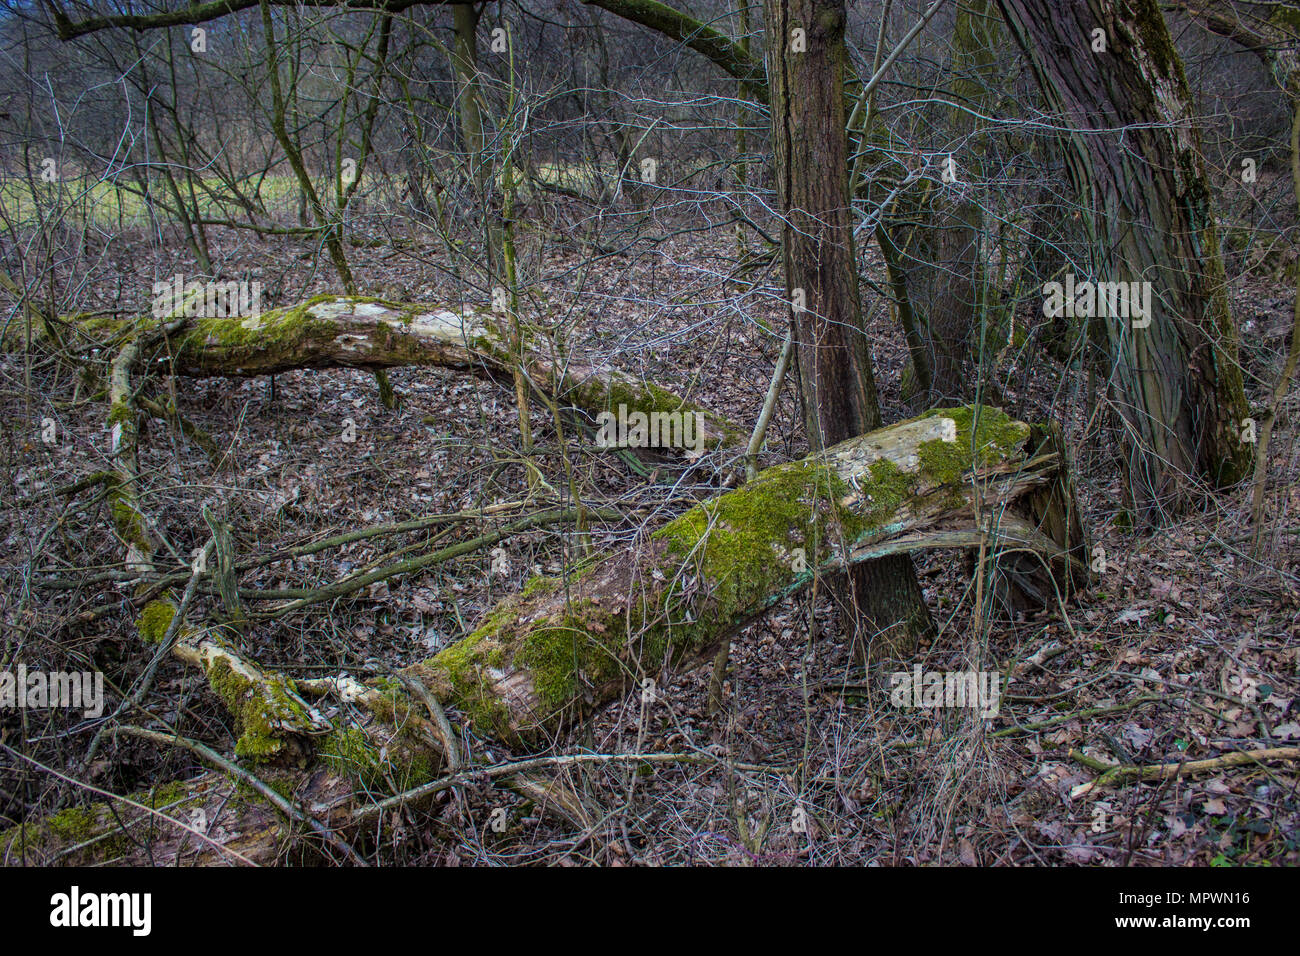 In the foreground is mossy tree, leaves and twigs. Stock Photo